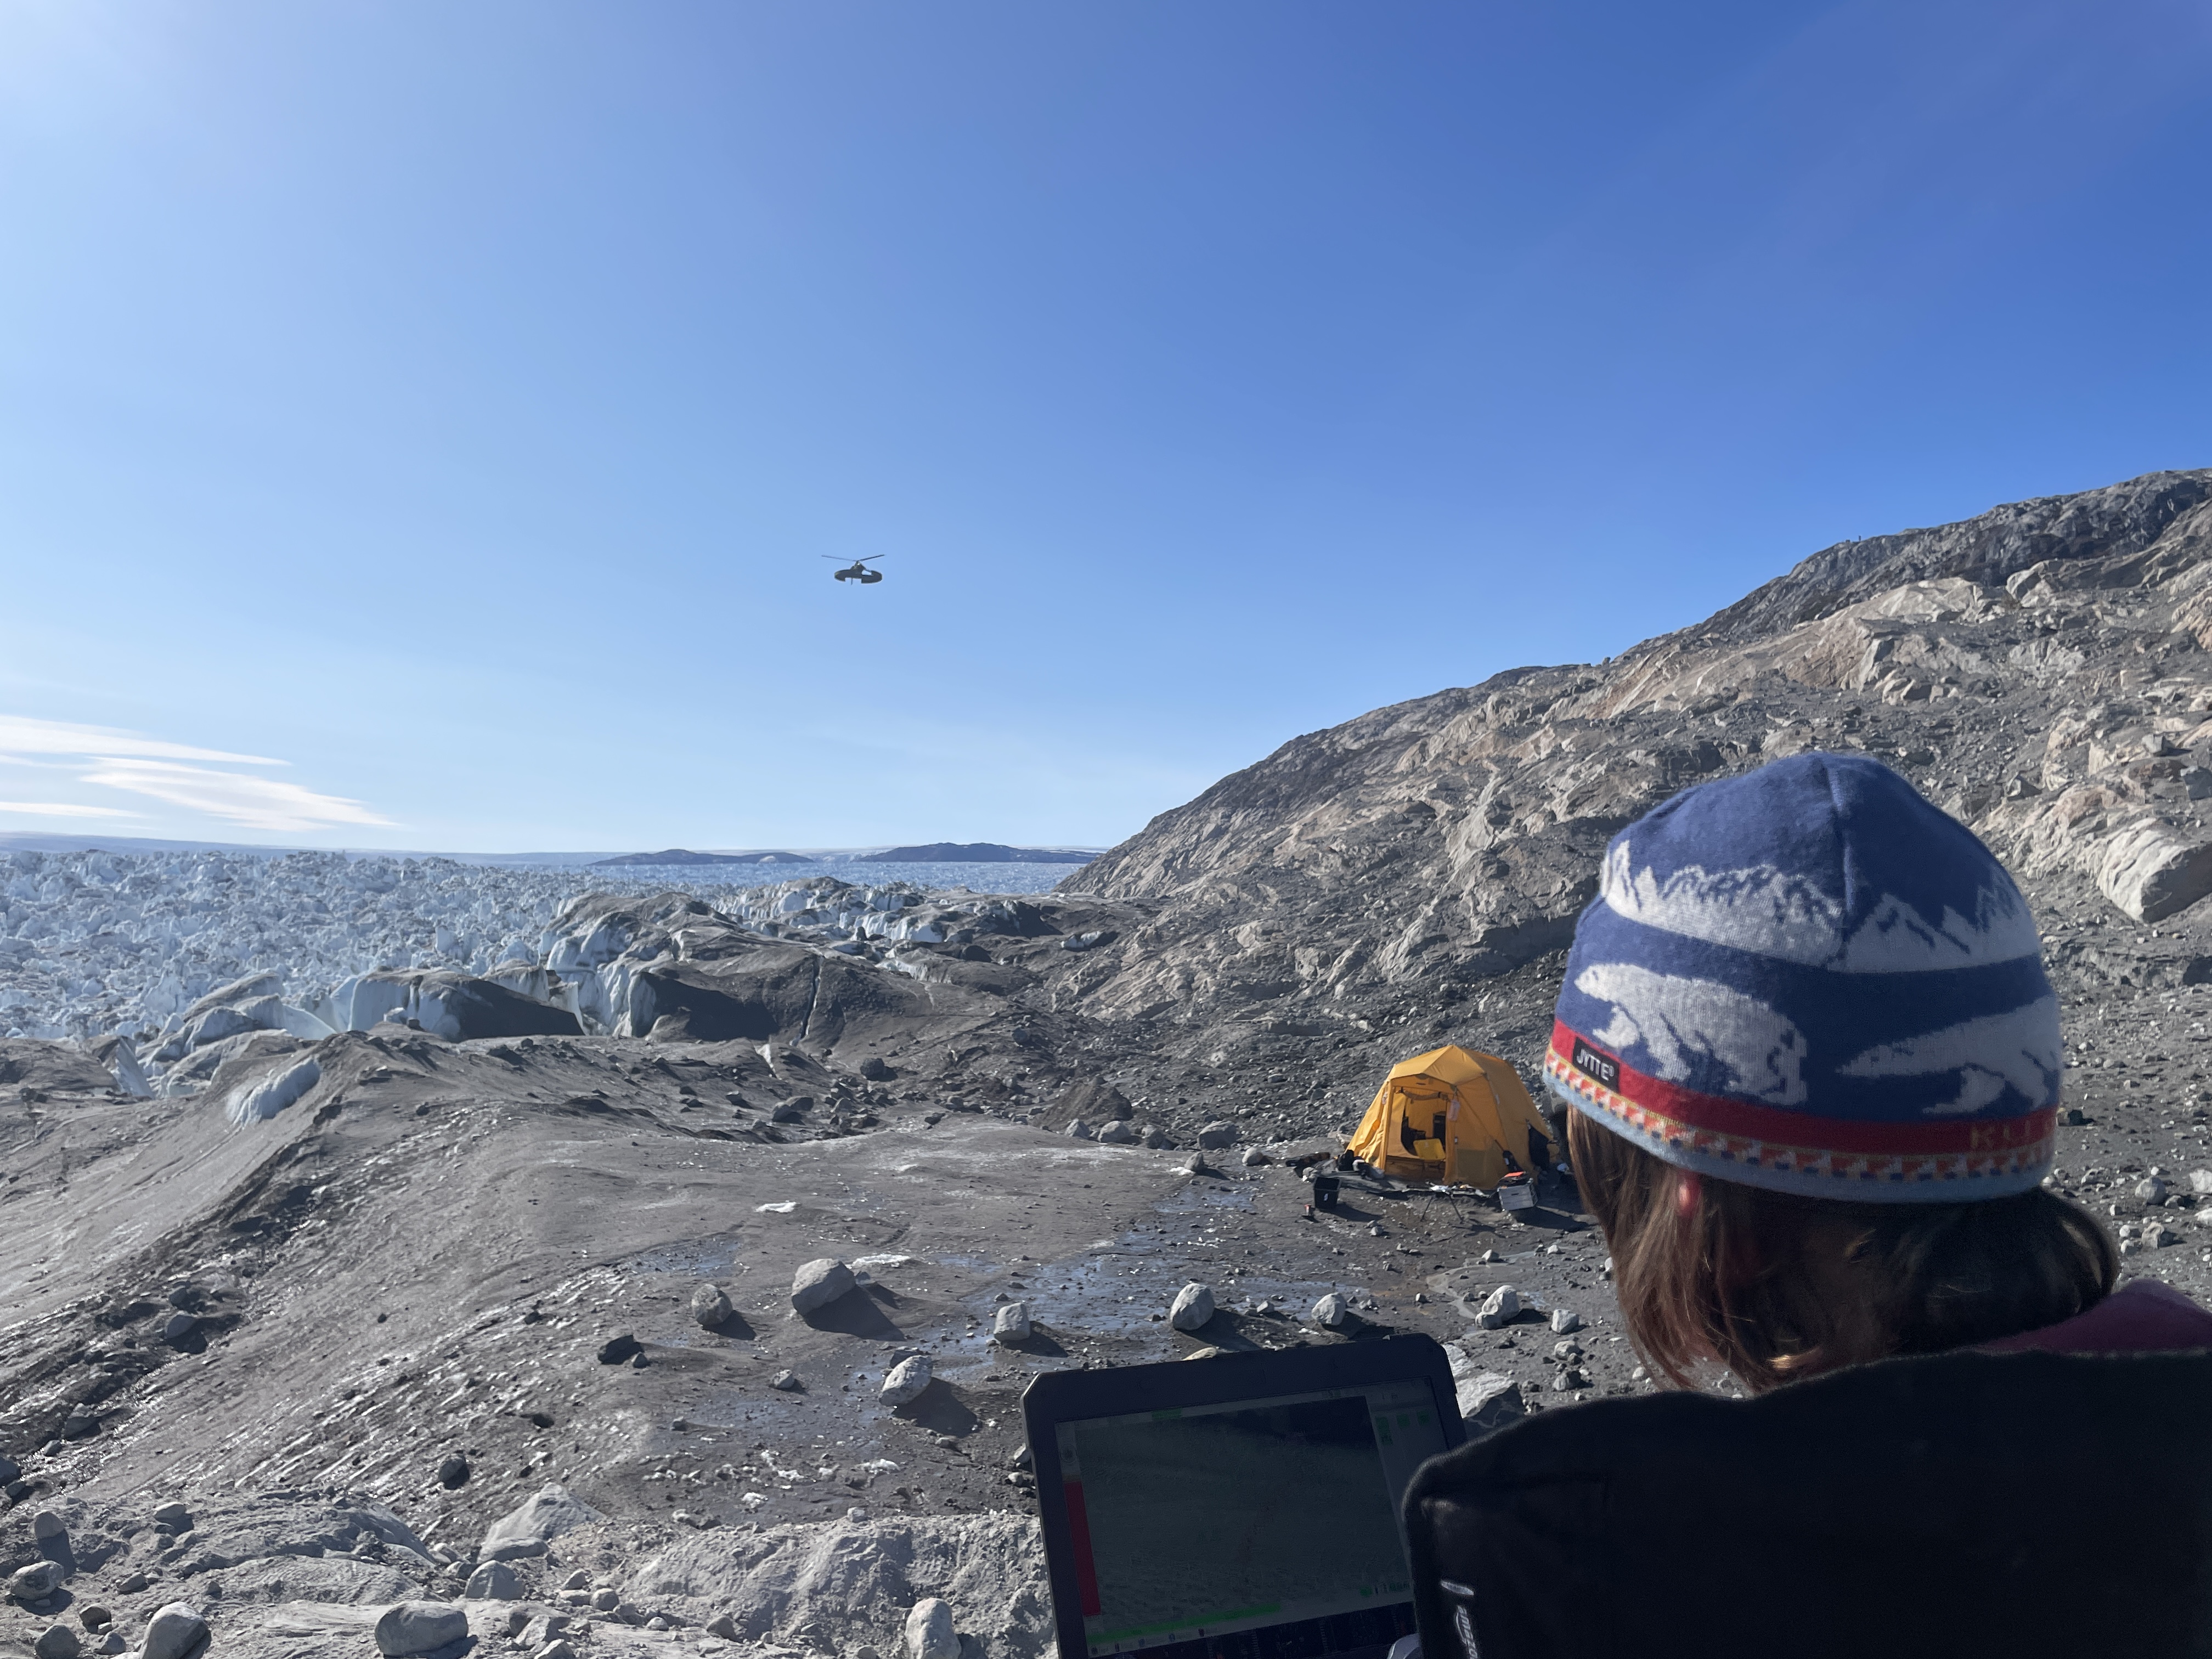 "Researchers pilot a drone flying over the glacier. "